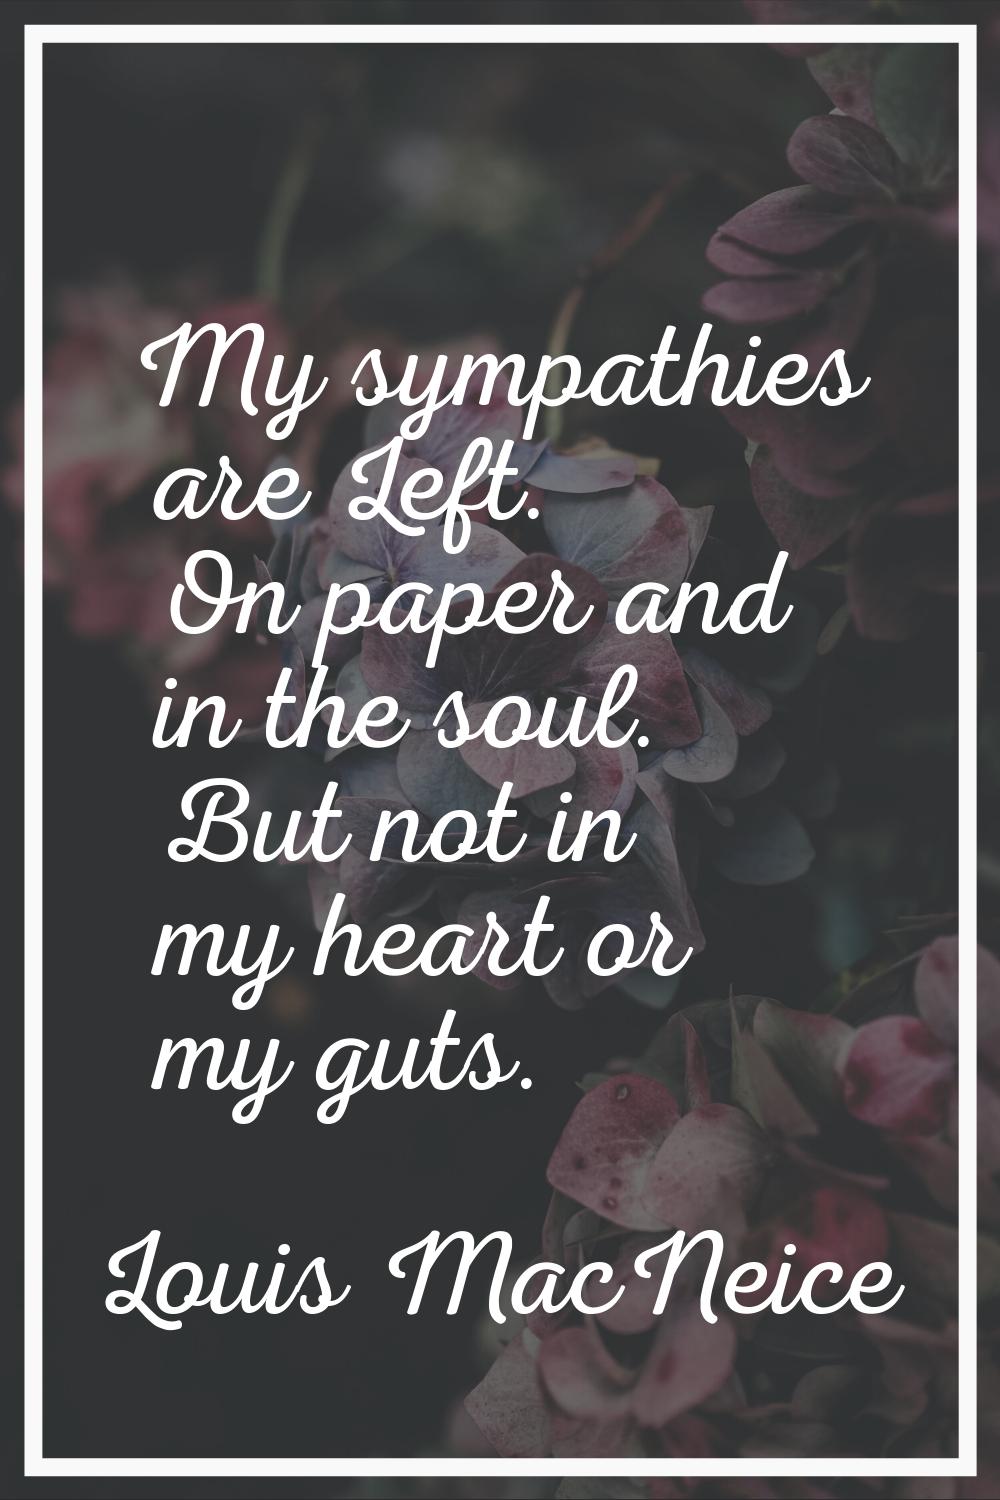 My sympathies are Left. On paper and in the soul. But not in my heart or my guts.